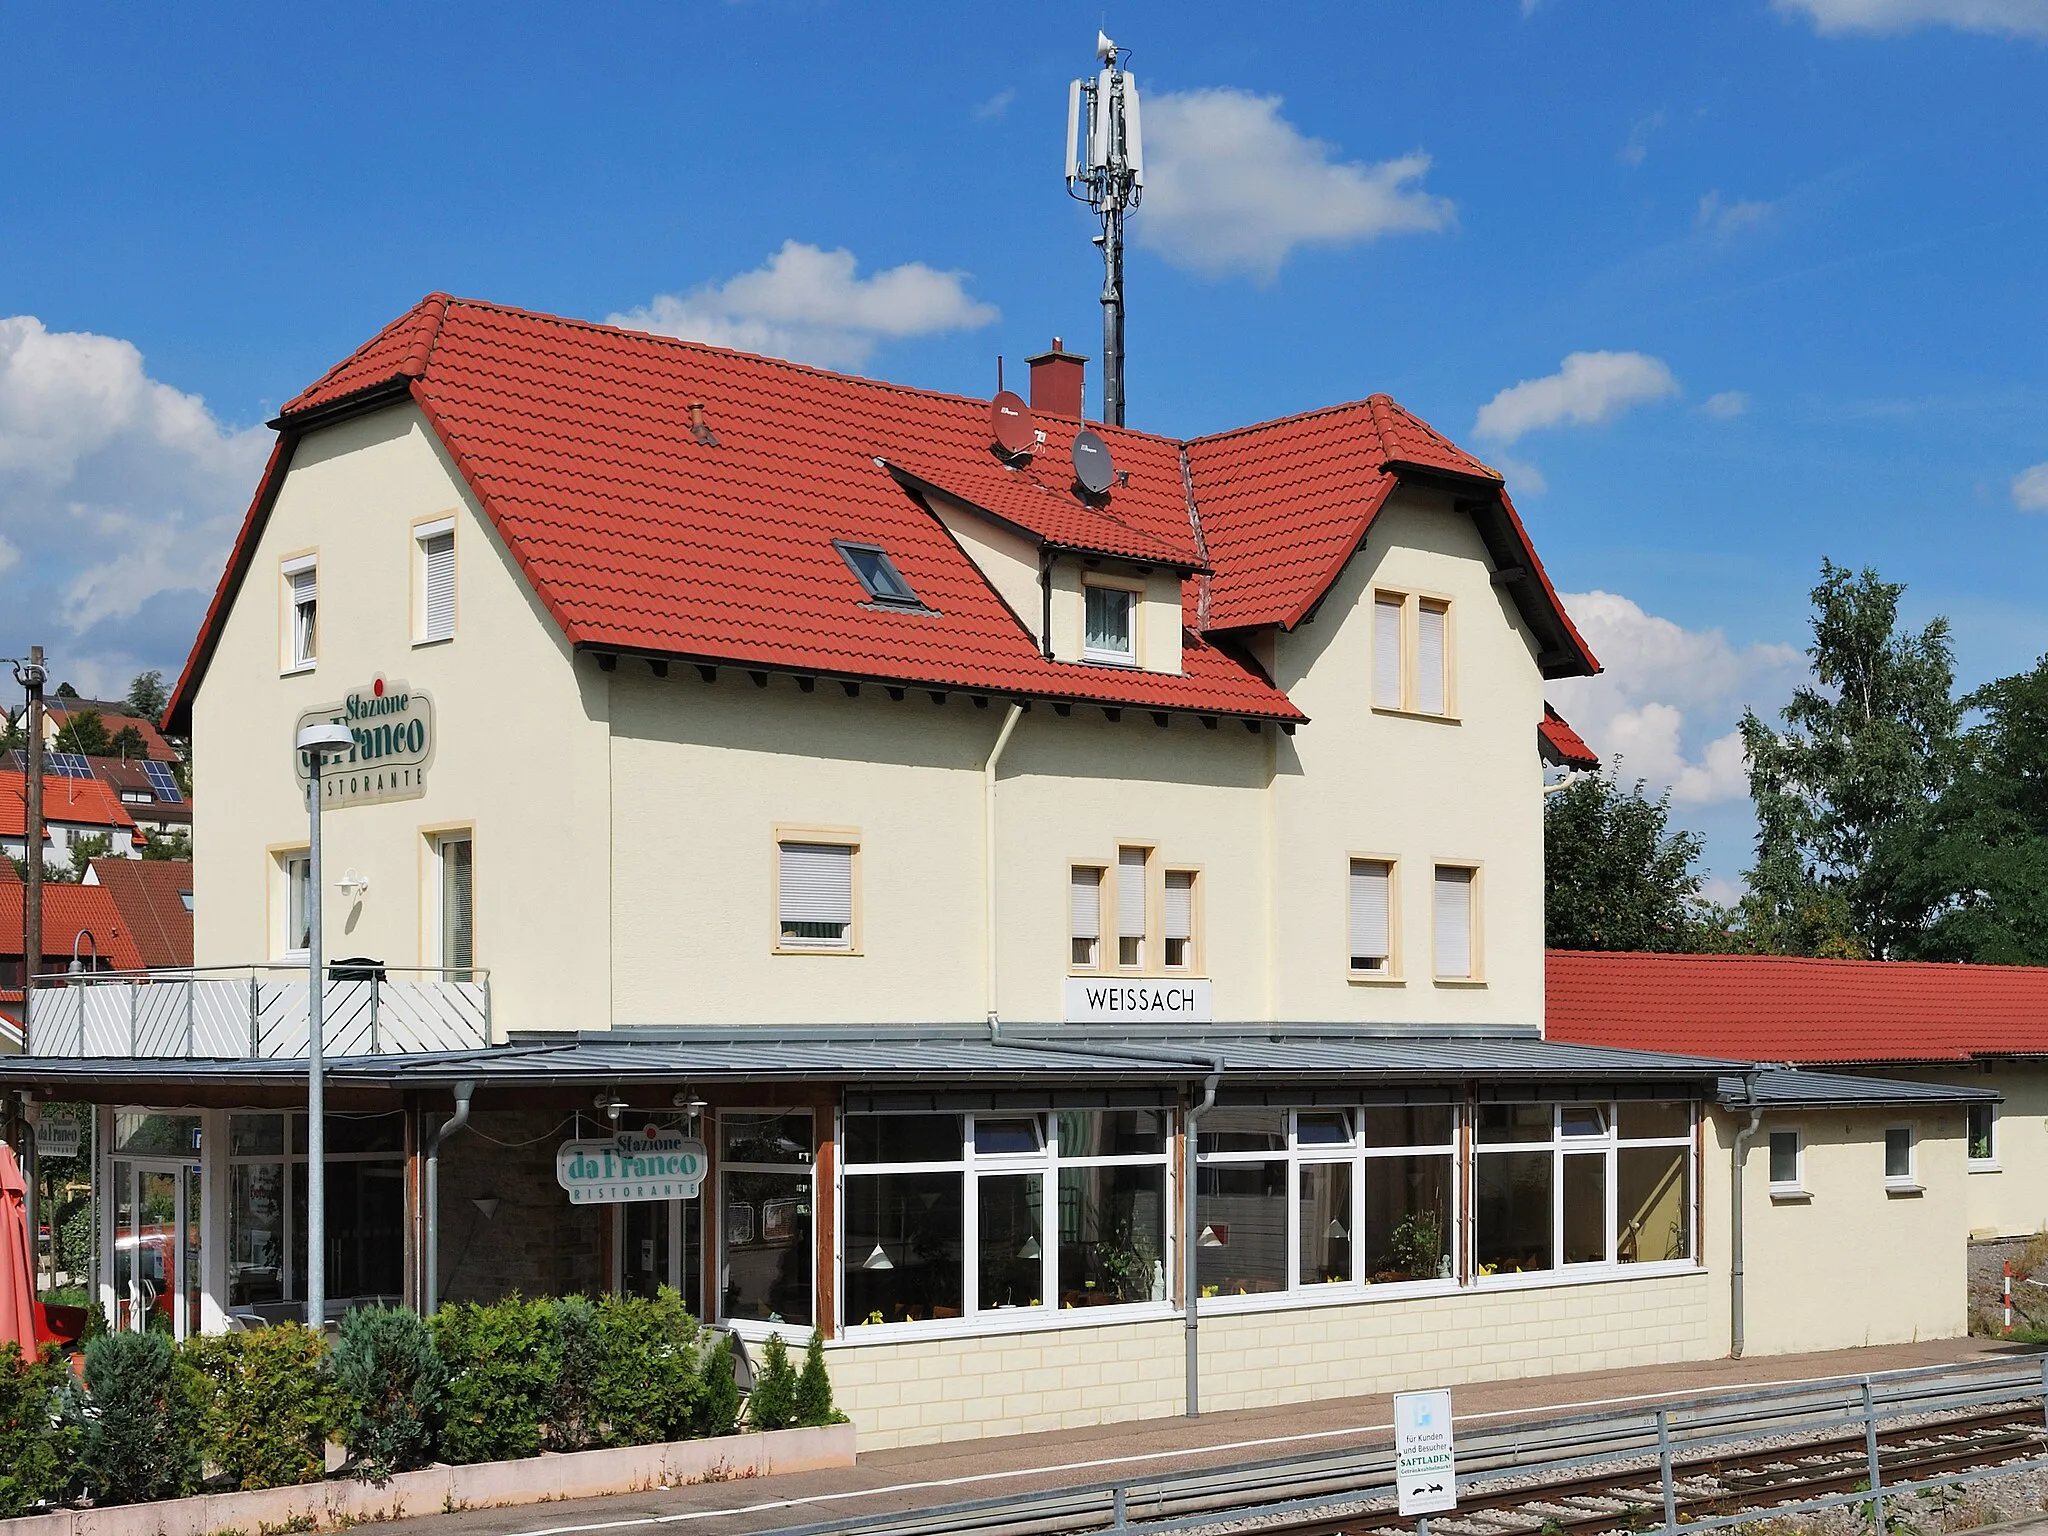 Photo showing: The railway building in Weissach in Southern Germany.